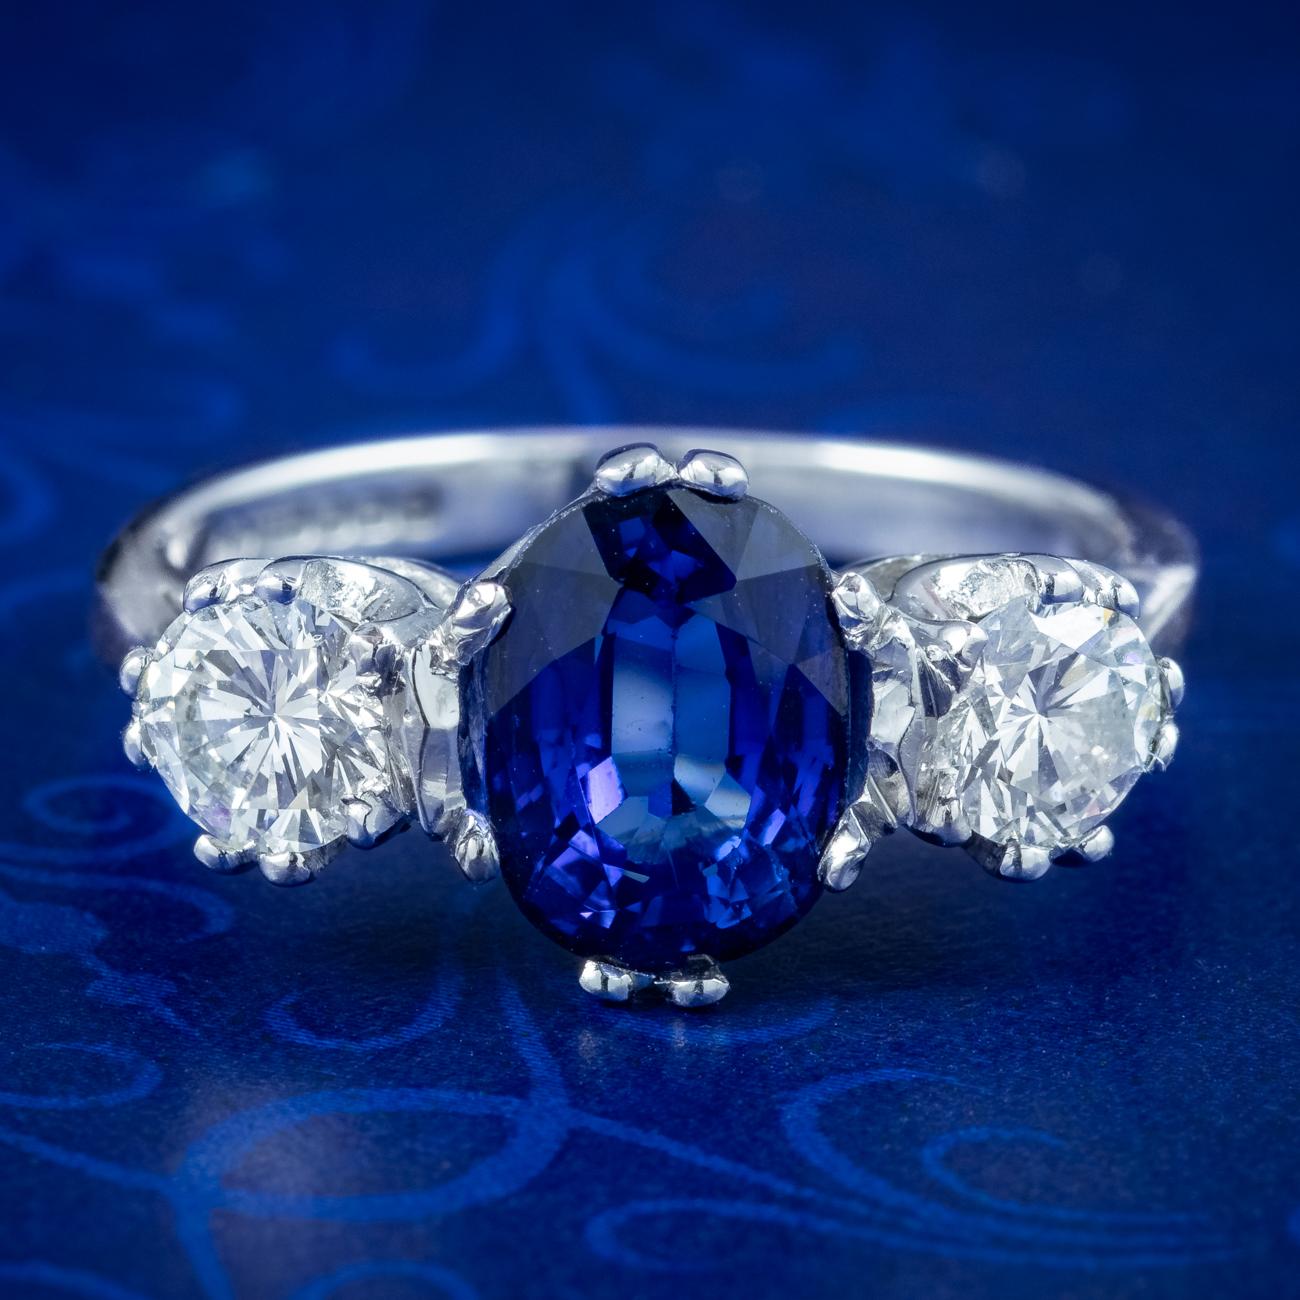 A stunning trilogy ring adorned with a striking oval cut sapphire in the centre weighing approx. 2ct, flanked by twin brilliant cut diamonds on either side, approx. 0.40ct each. The sapphire has a regal deep blue hue and is complemented beautifully